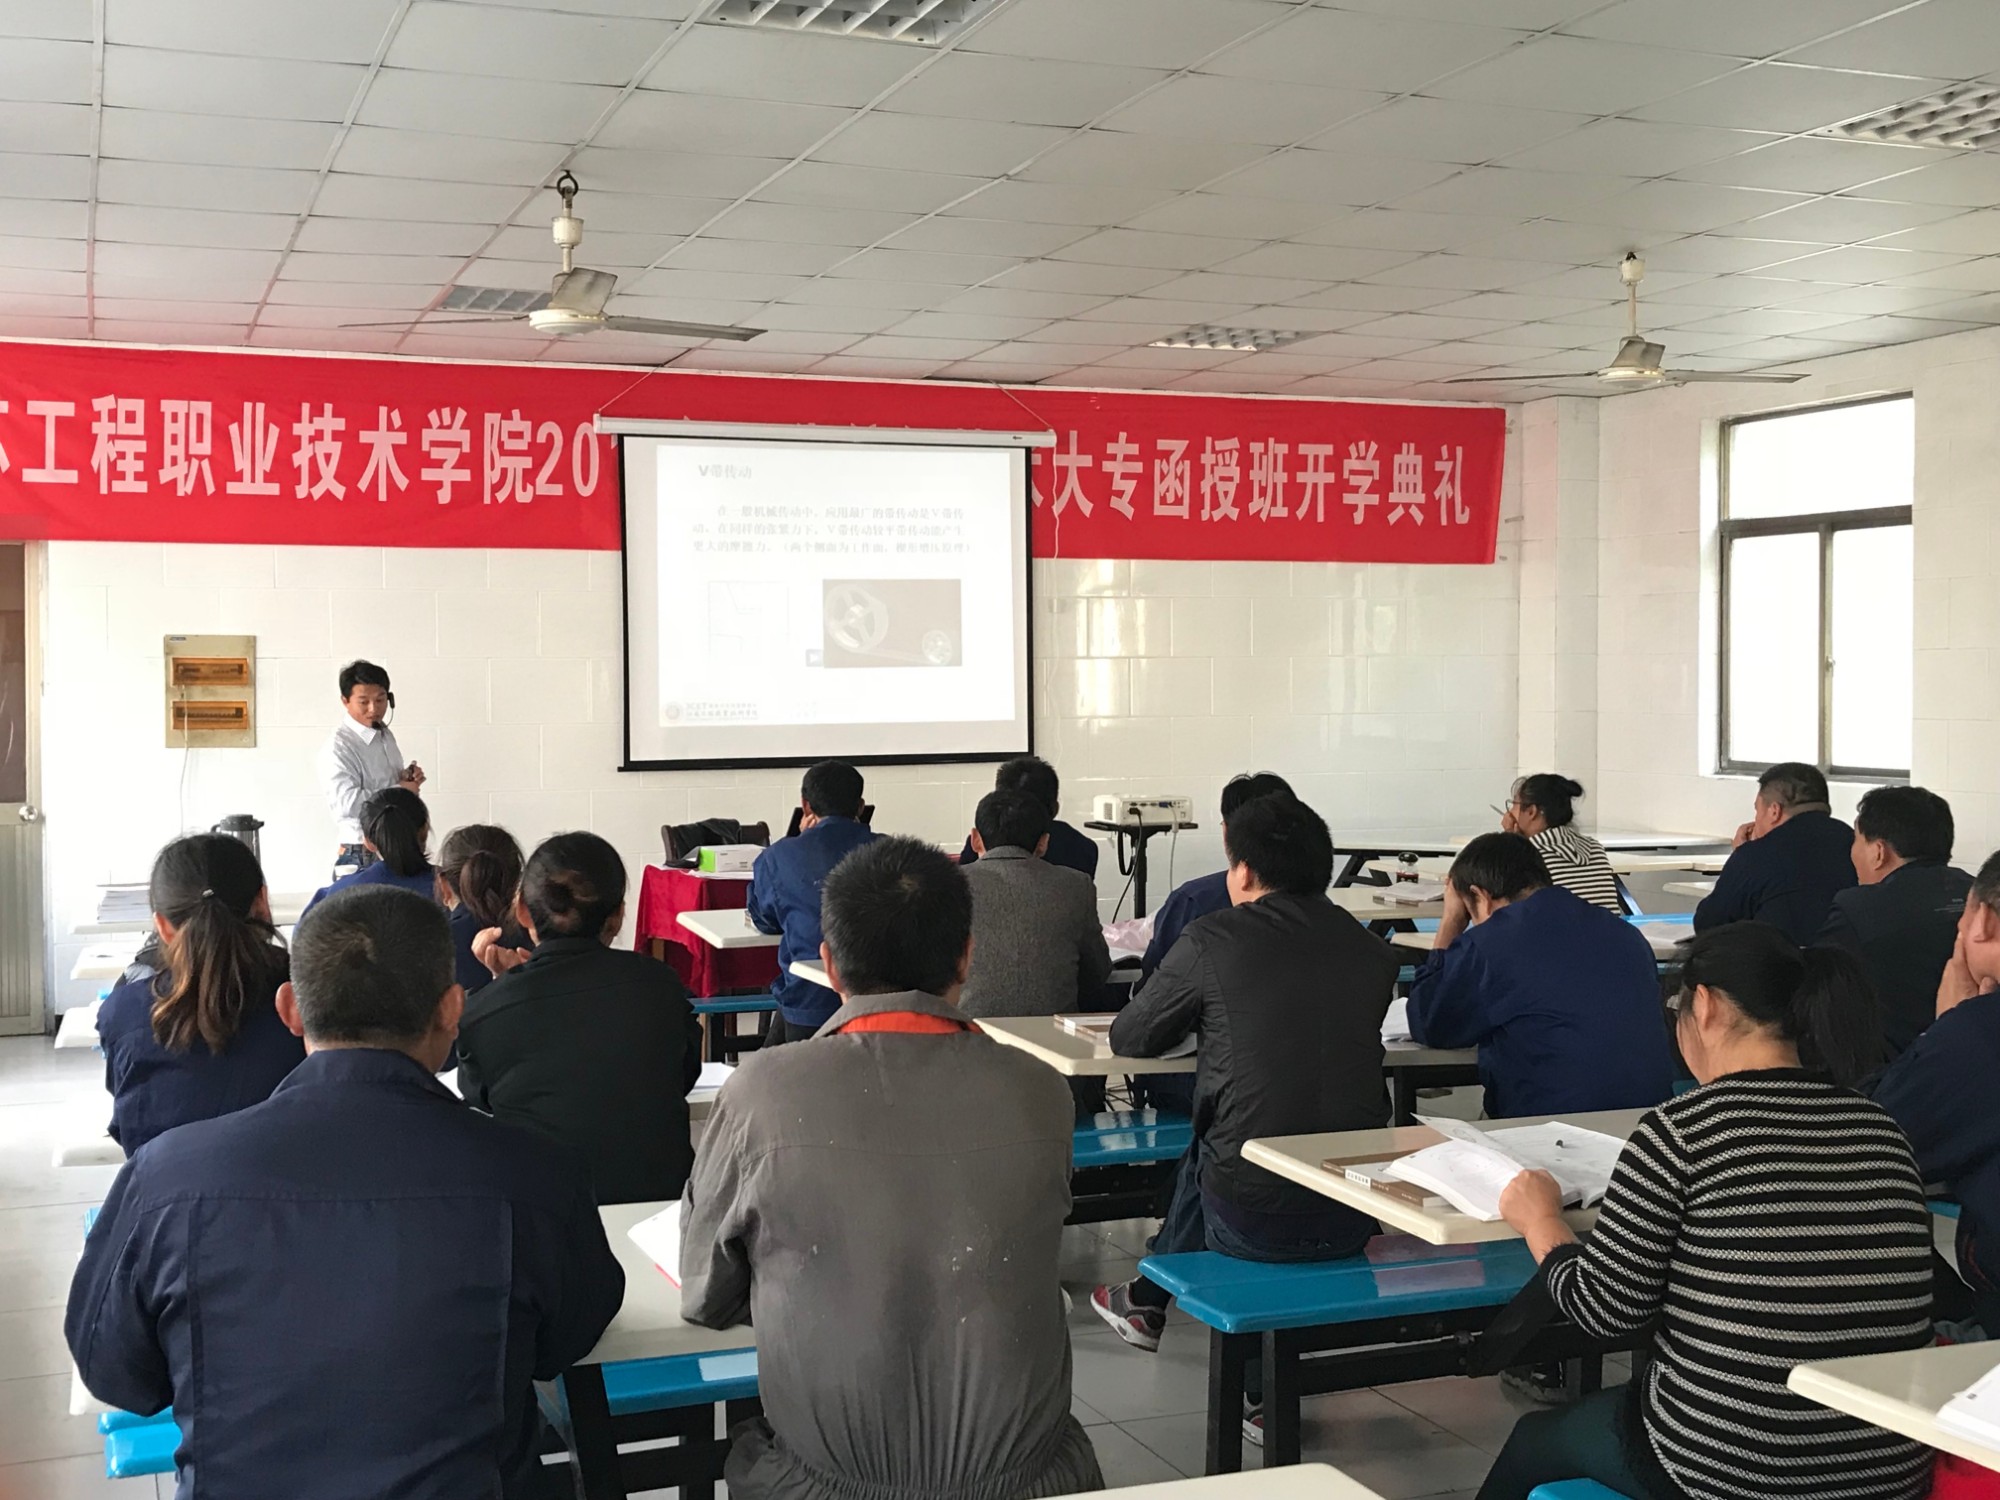 Jiangsu Engineering Vocational and Technical College sent experts and professors to our company to carry out professional training for employees